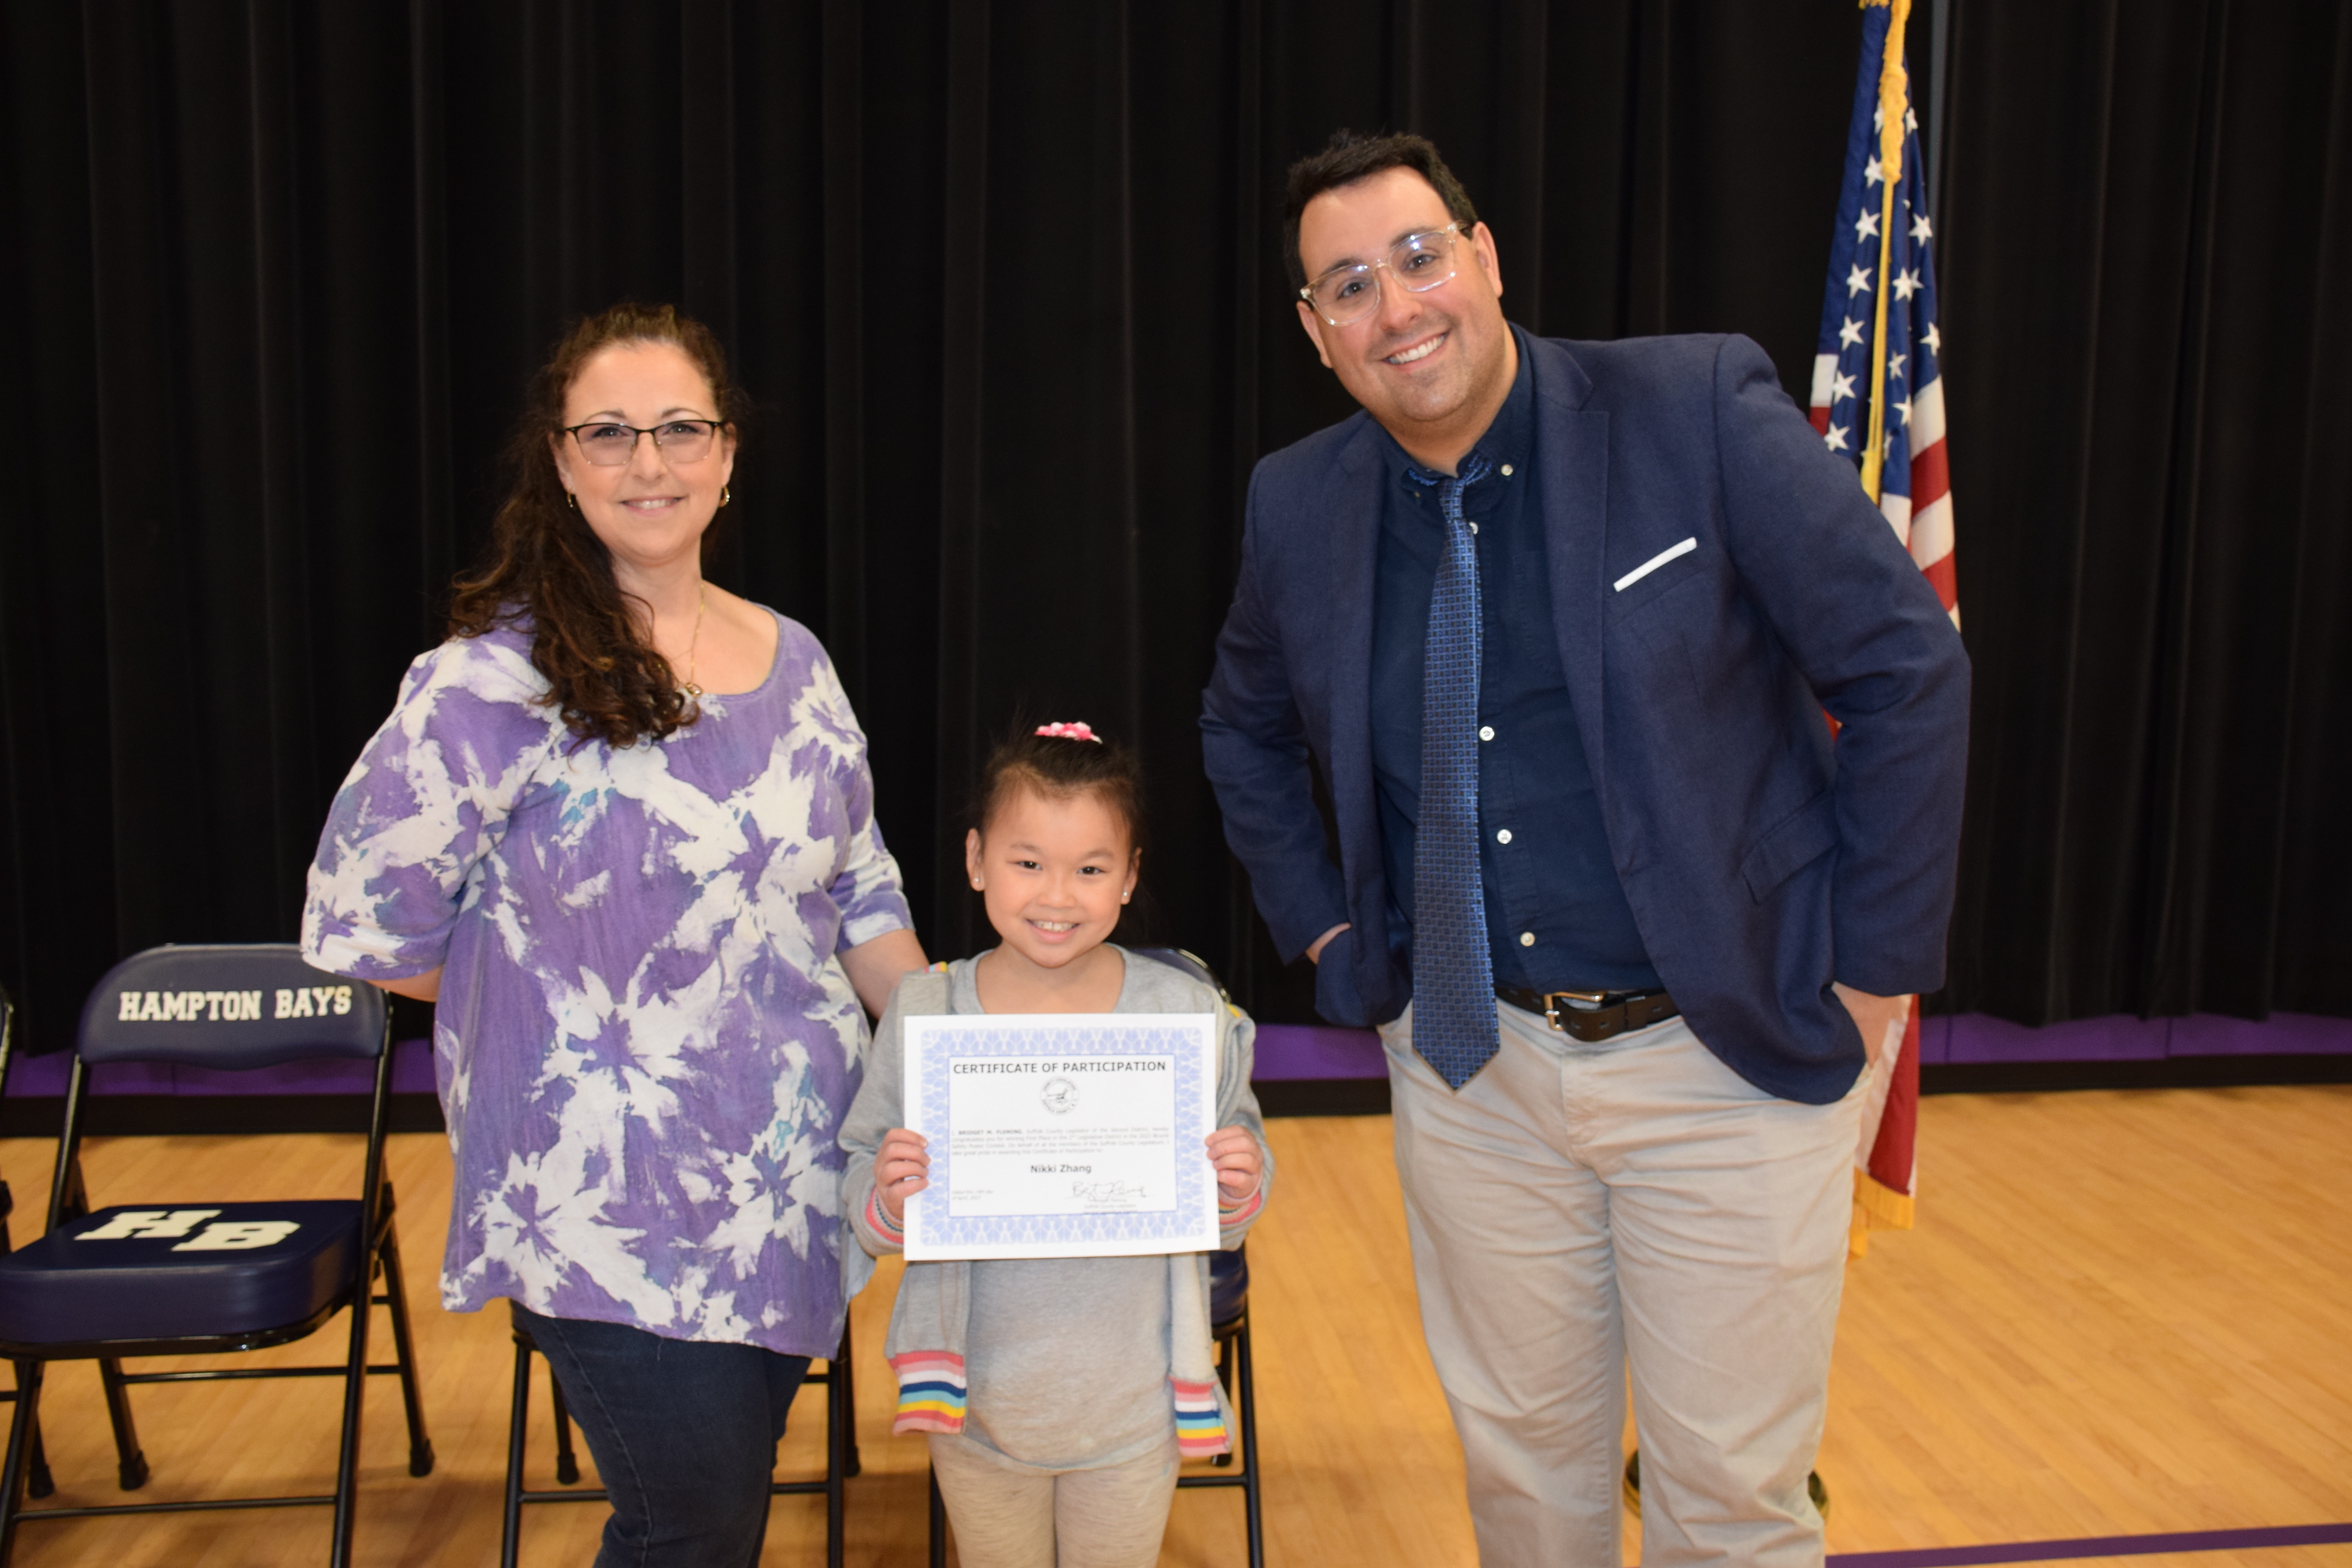 Hampton Bays Elementary School third-grader Nikki Zhang was recently awarded first place in the Suffolk County Legislature’s Bike Safety Poster Contest. Zhang was one of 73 Hampton Bays students to participate in the contest and her work will be displayed at Legislator Bridget Fleming’s office. All students received a certificate of participation from Legislator Fleming during a ceremony on April 25. From left, Hampton Bays Elementary School art teacher Debra McDowell, Nikki Zhang and Dr.
Michael Lasilli, representative for Suffolk Country Legislator Bridget Fleming. COURTESY HAMPTON BAYS SCHOOL DISTRICT